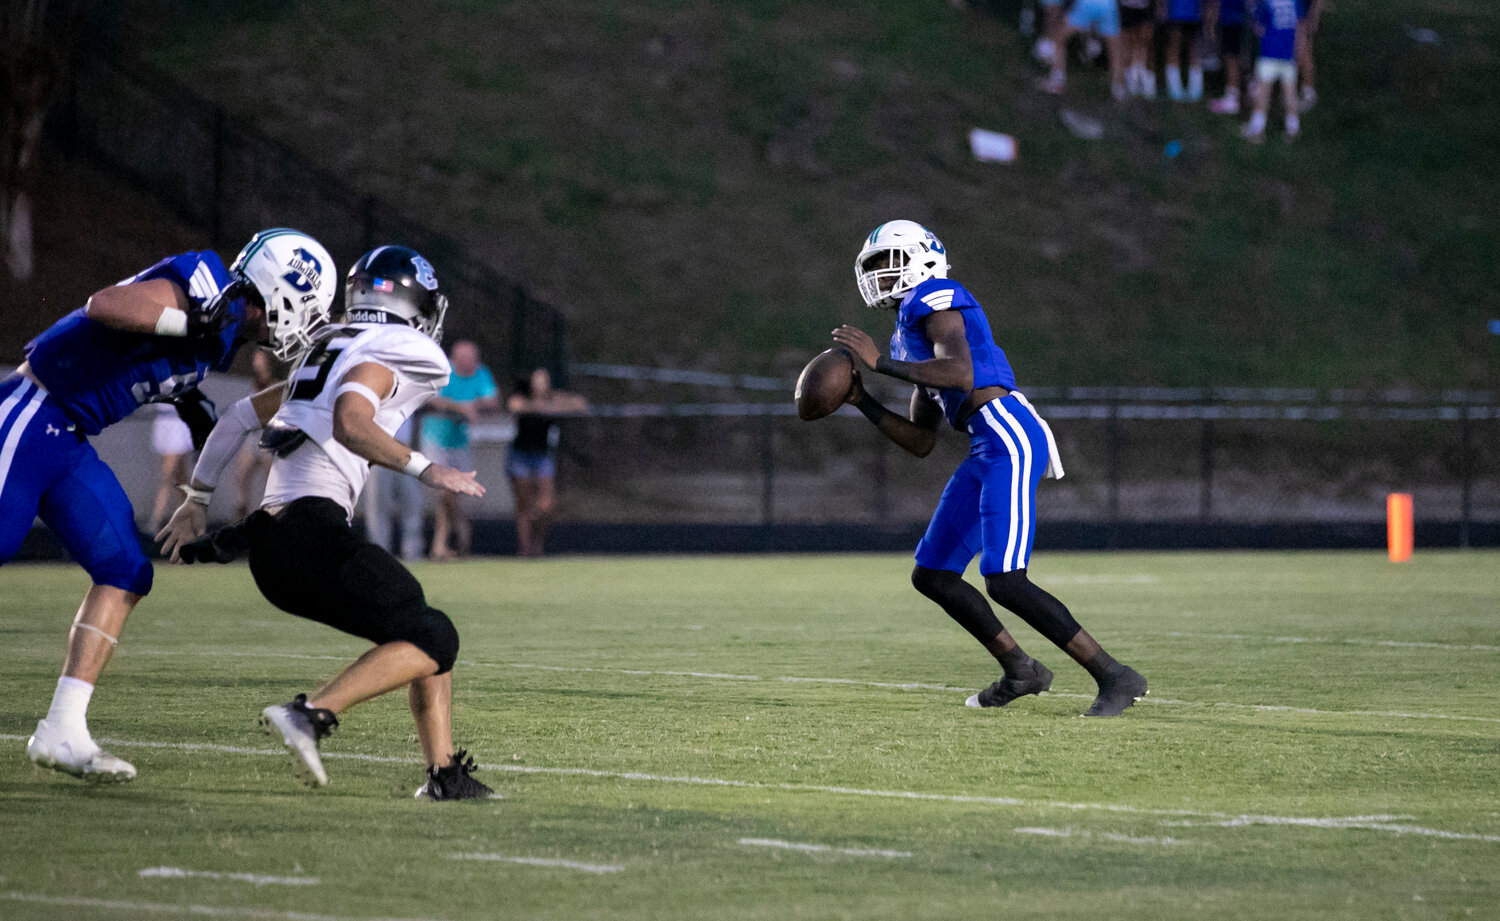 Bayside Academy sophomore Sammy Dunn loads up a throw during non-region action against the Elberta Warriors on Aug. 25 at home. Friday night against Wilcox Central, Dunn threw five touchdown passes to four different receivers to help move the Admirals to 4-0 for the second season in a row.